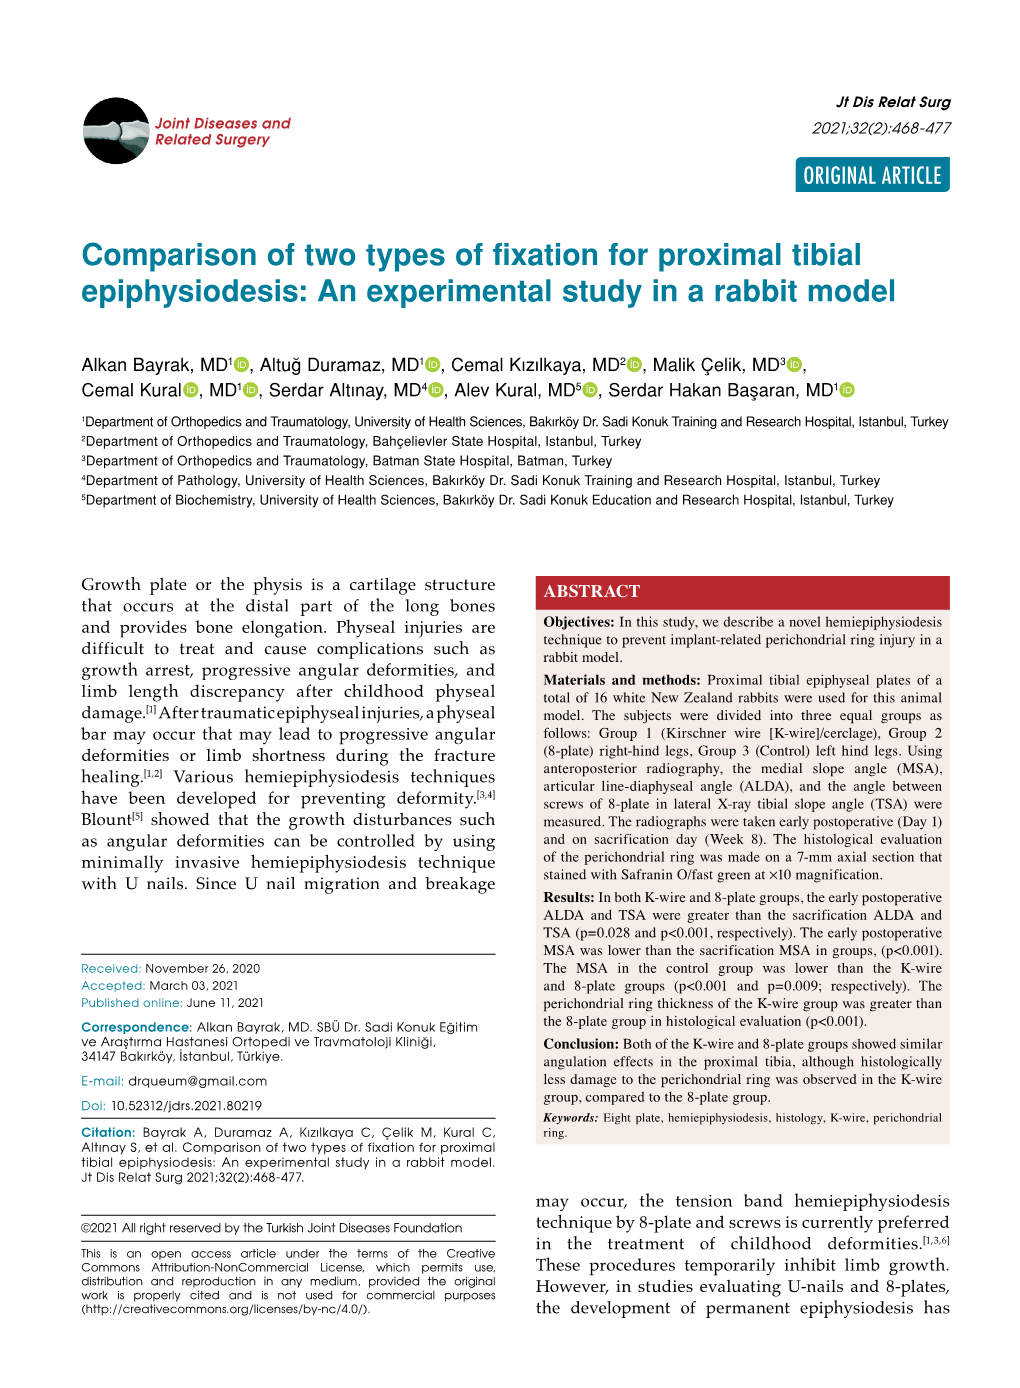 Comparison of Two Types of Fixation for Proximal Tibial Epiphysiodesis: an Experimental Study in a Rabbit Model